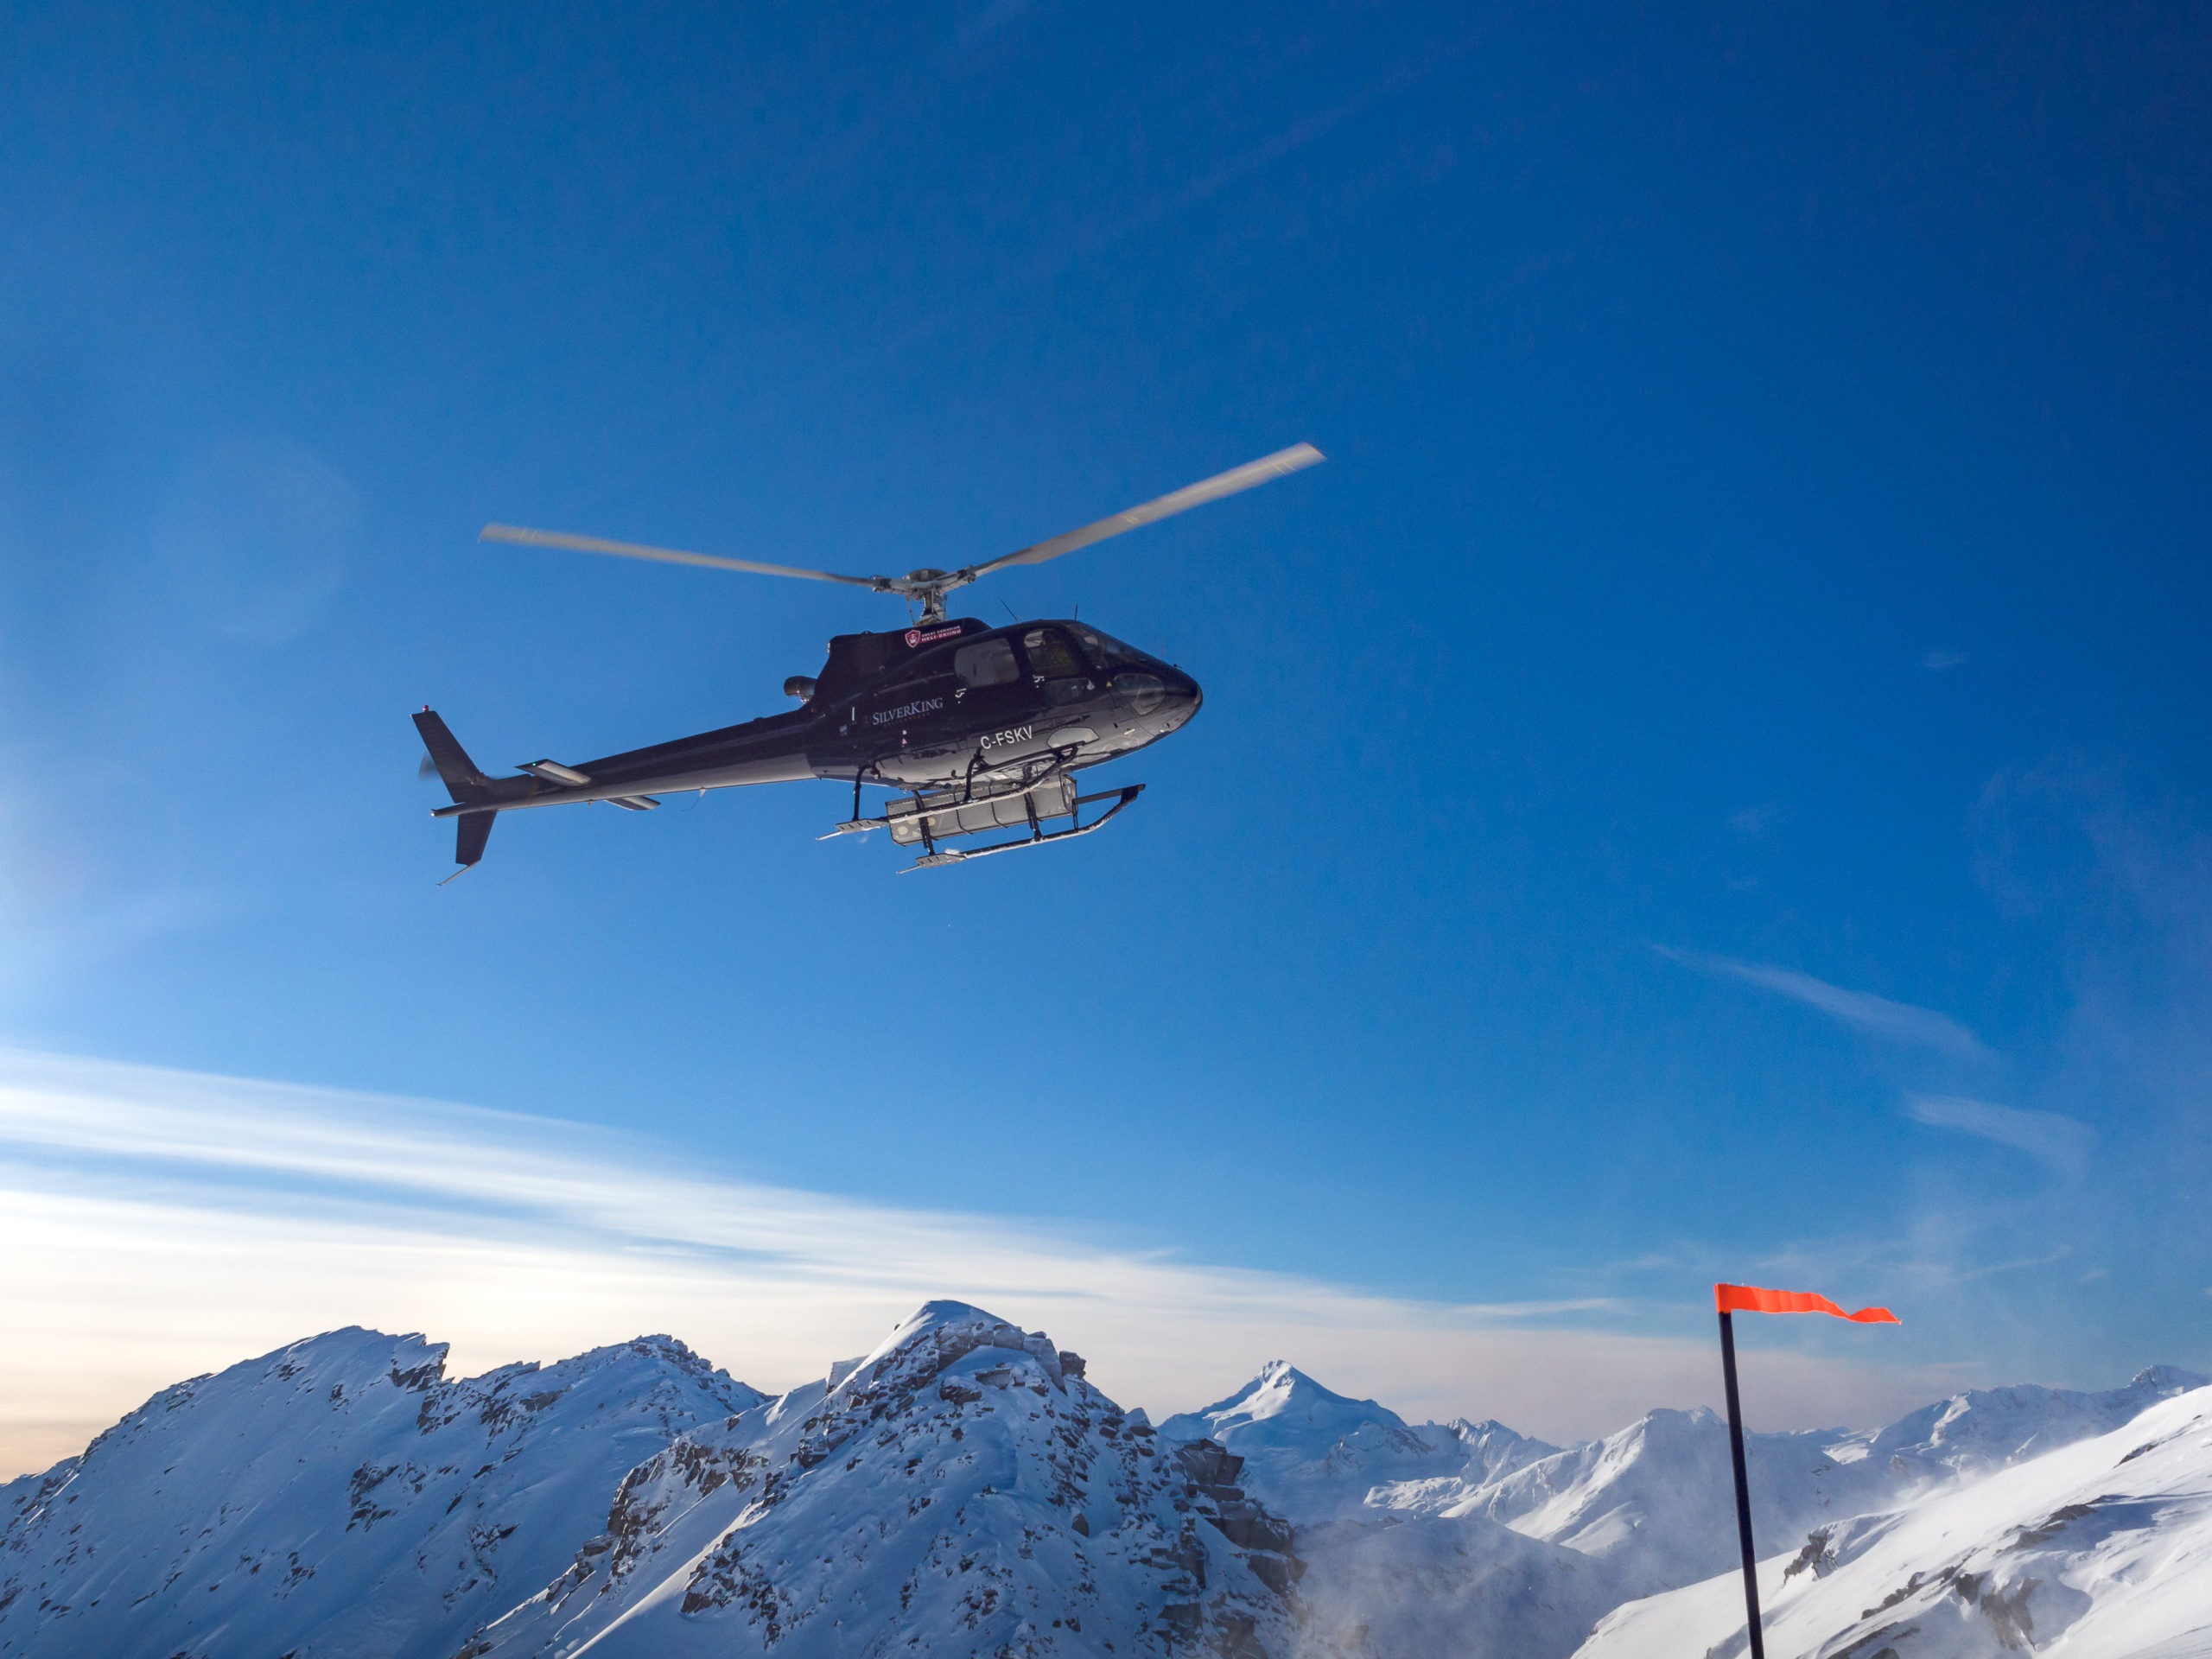 Helicopter flying above snowy mountains